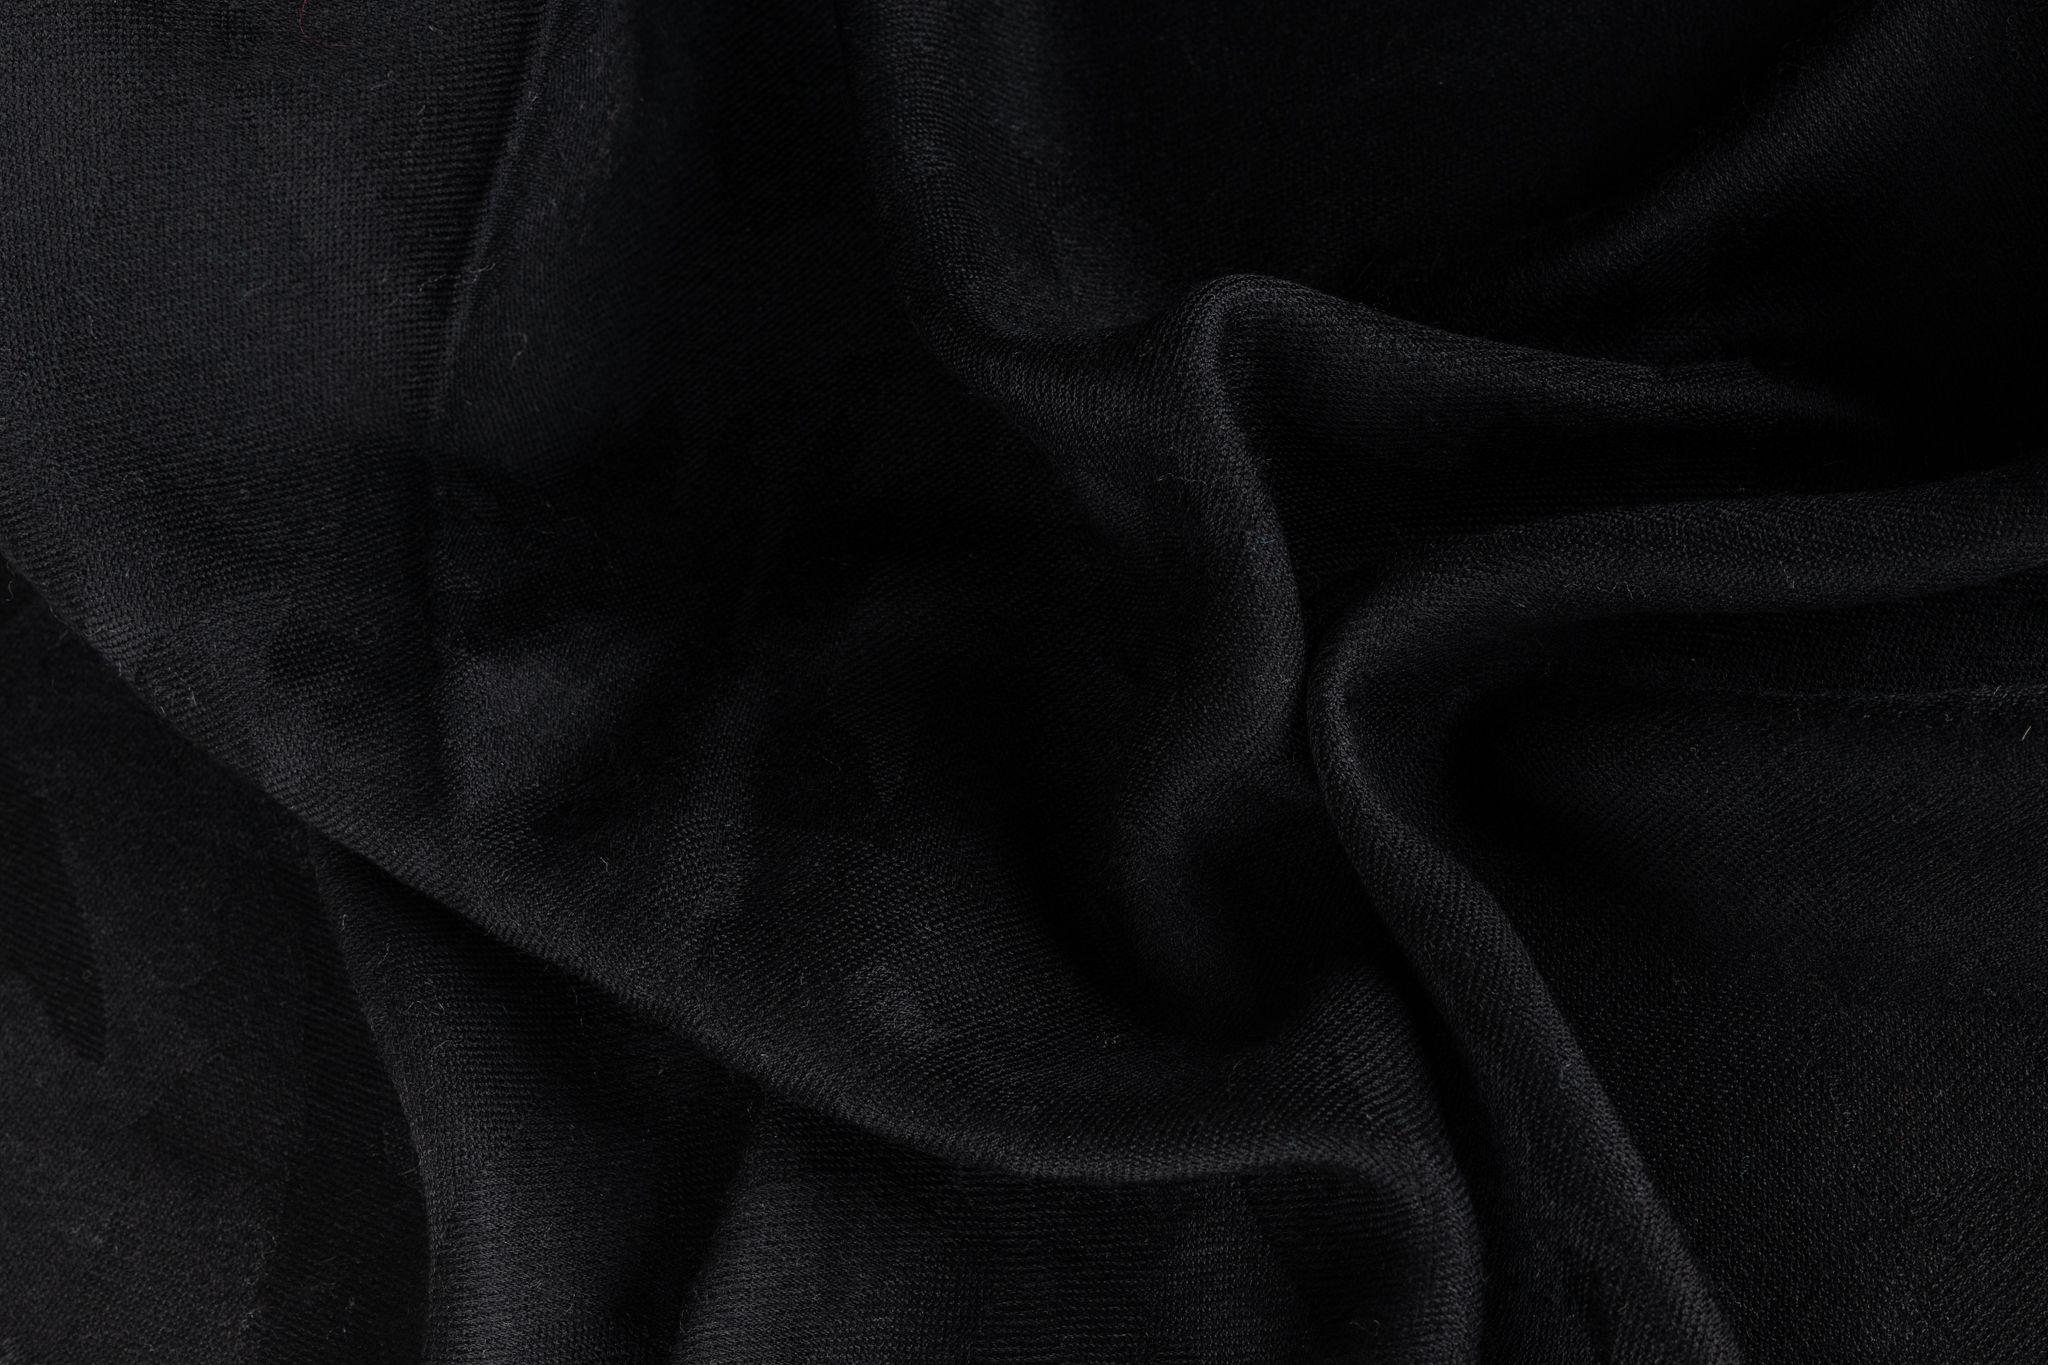 Chanel Black Cashmere Shawl in excellent condition. An absolute classic which can be worn in so many different ways.